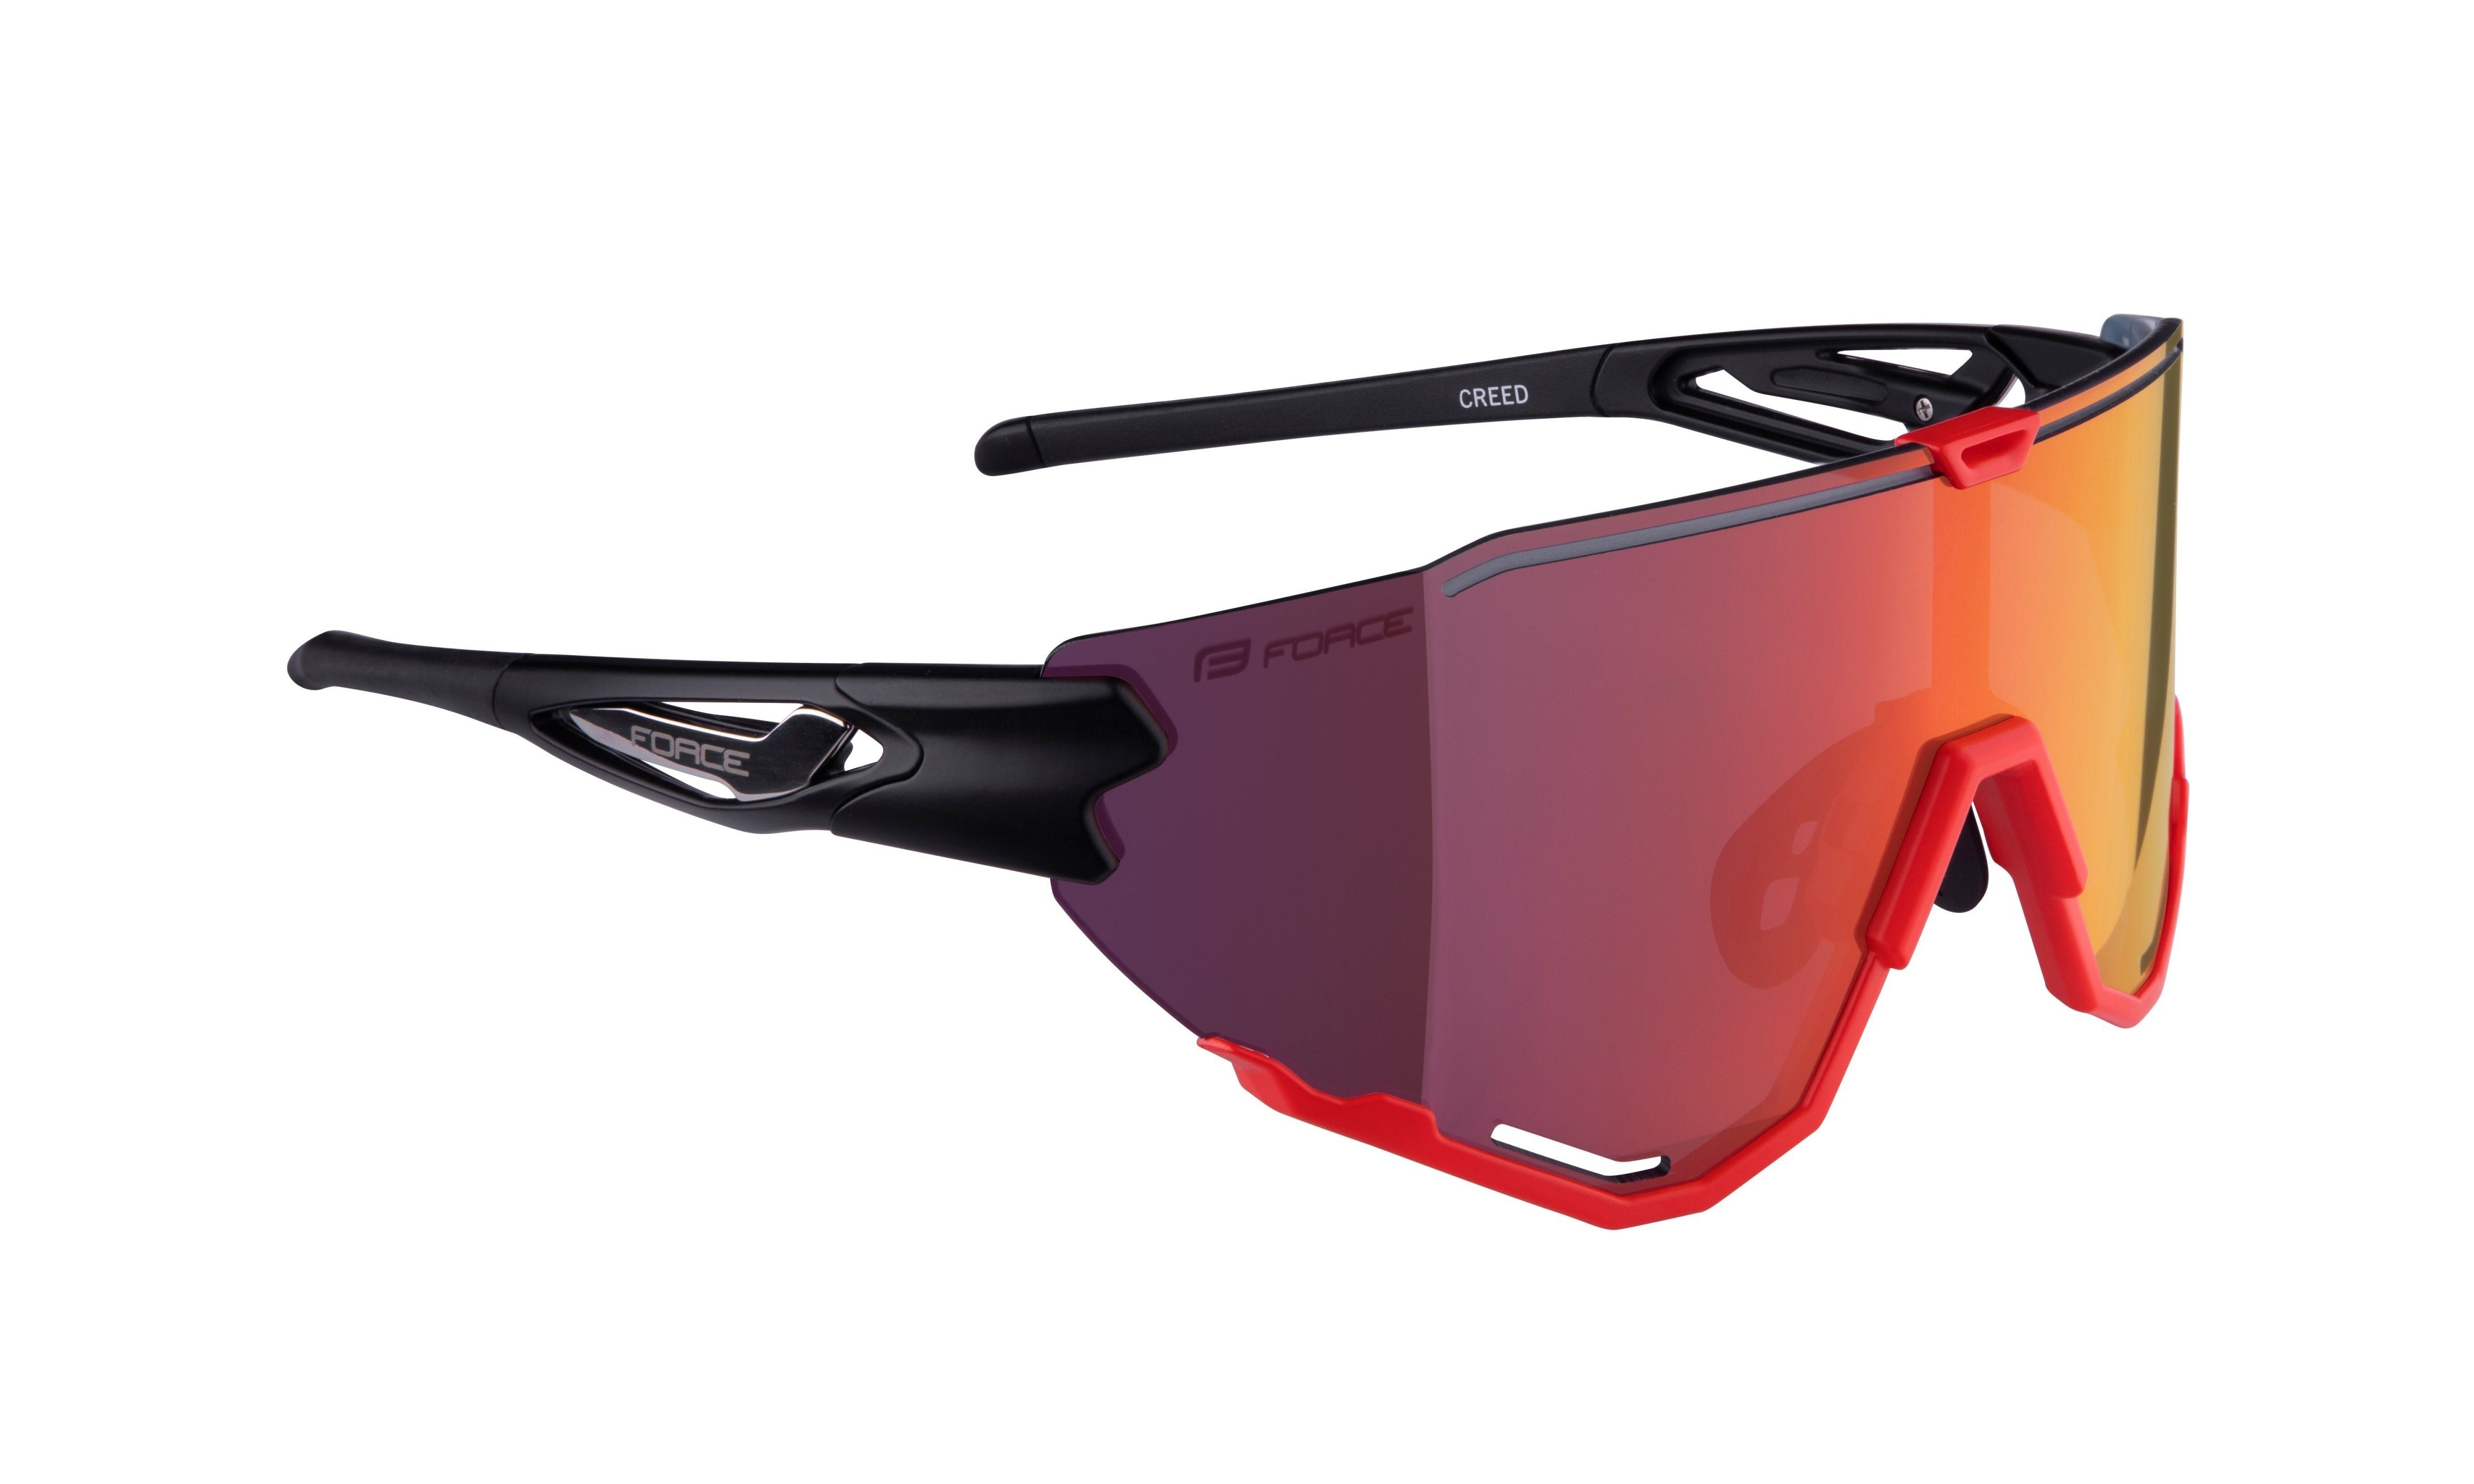 FORCE Fahrradbrille FORCE Sonnenbrille Wechsel-Linsscheibe rote CREED